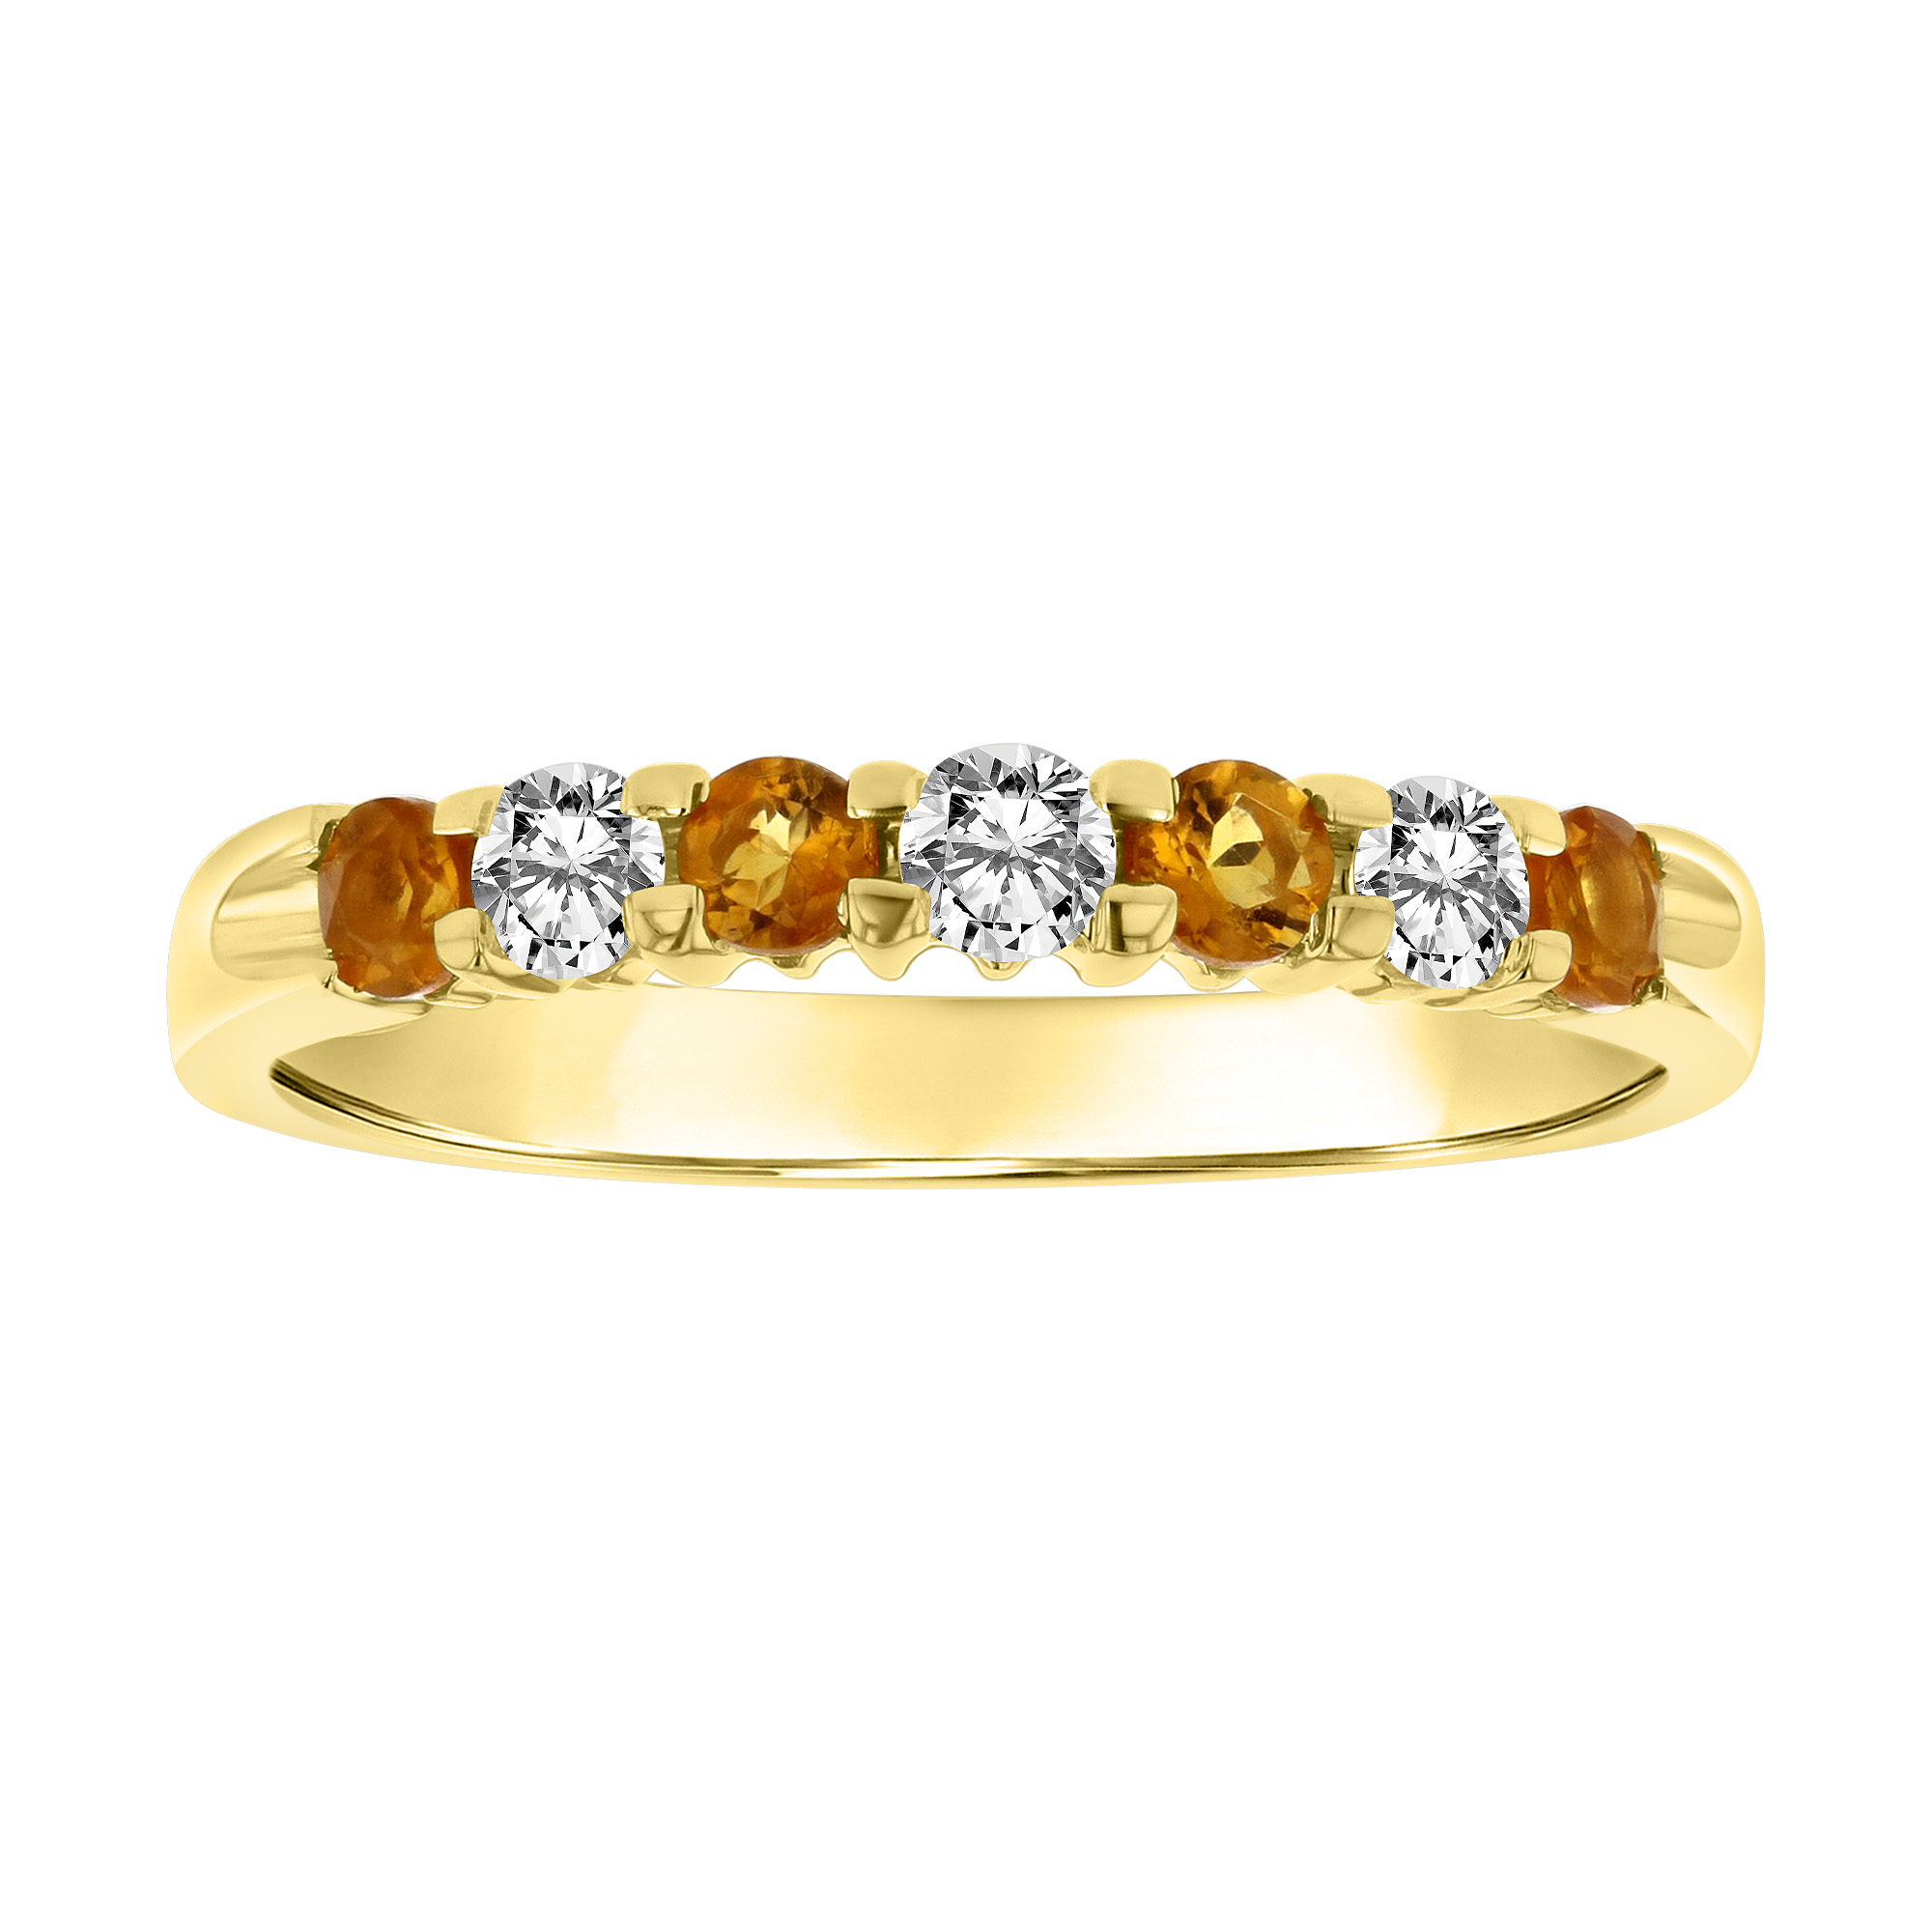 View 0.45ctw Diamond and Citrine Band in 14k Gold